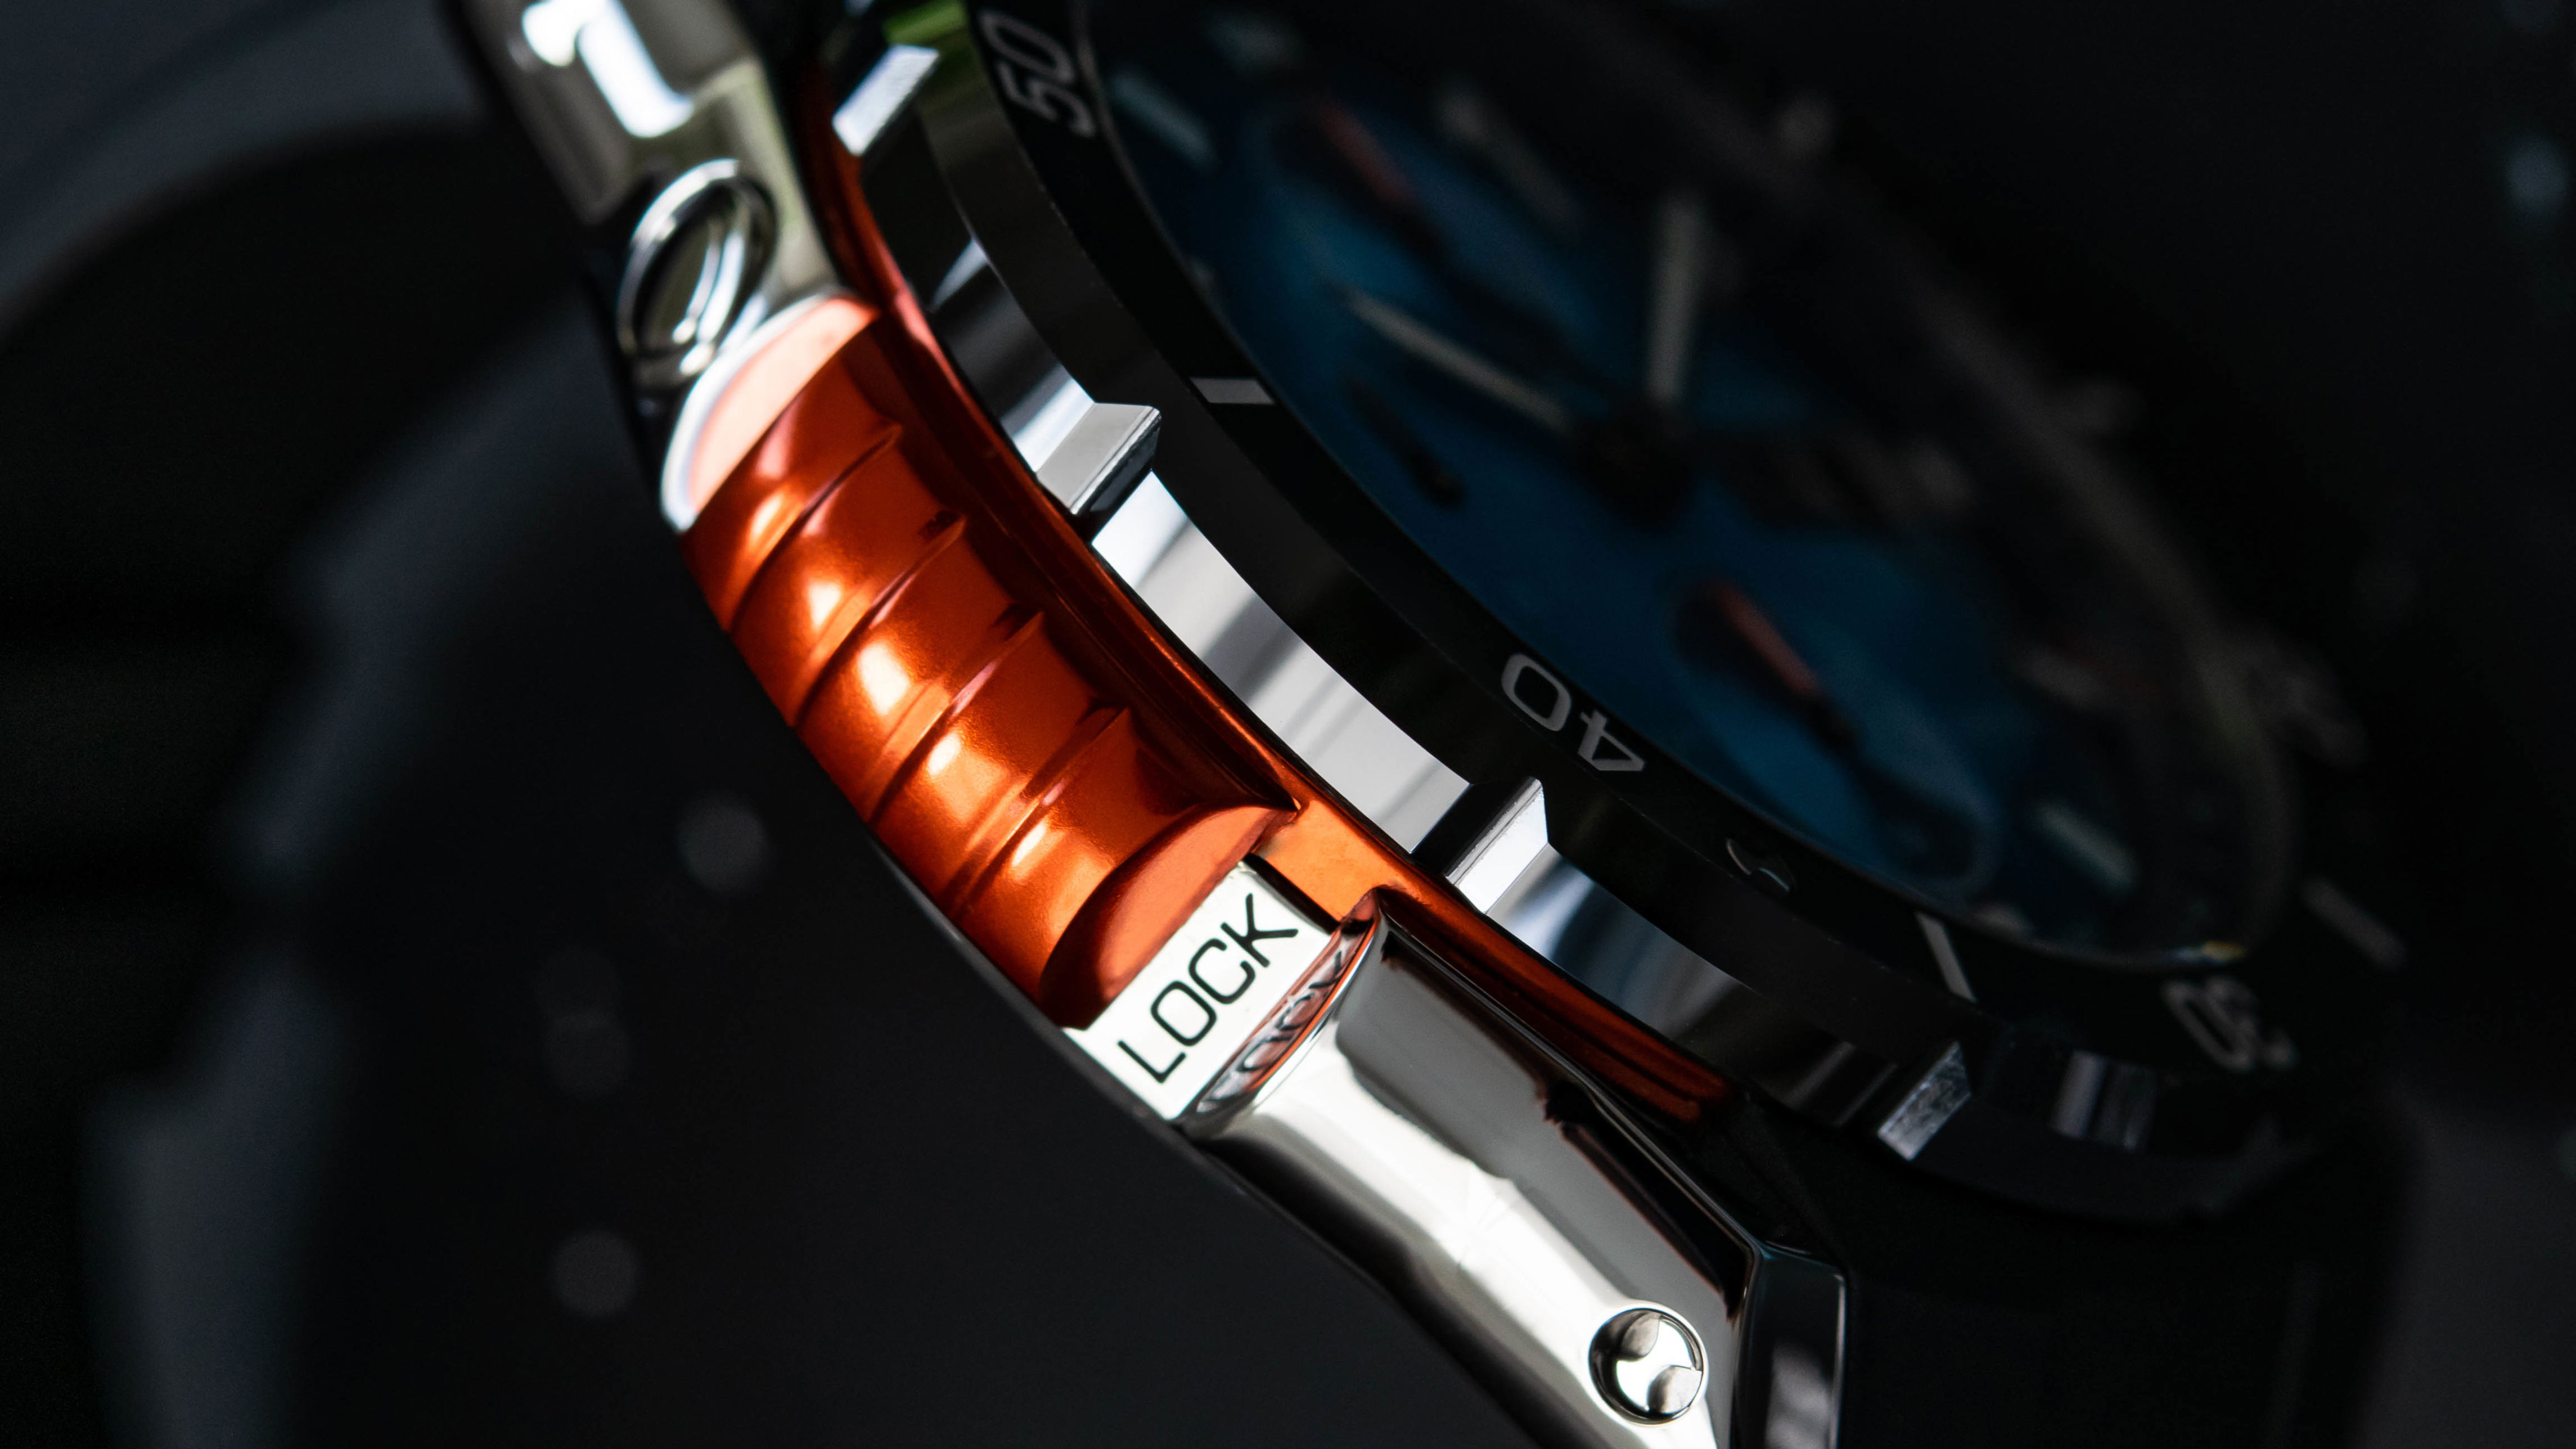 the edox co-1 chronograph automatic is a diving watch that was originally designed for powerboat racing